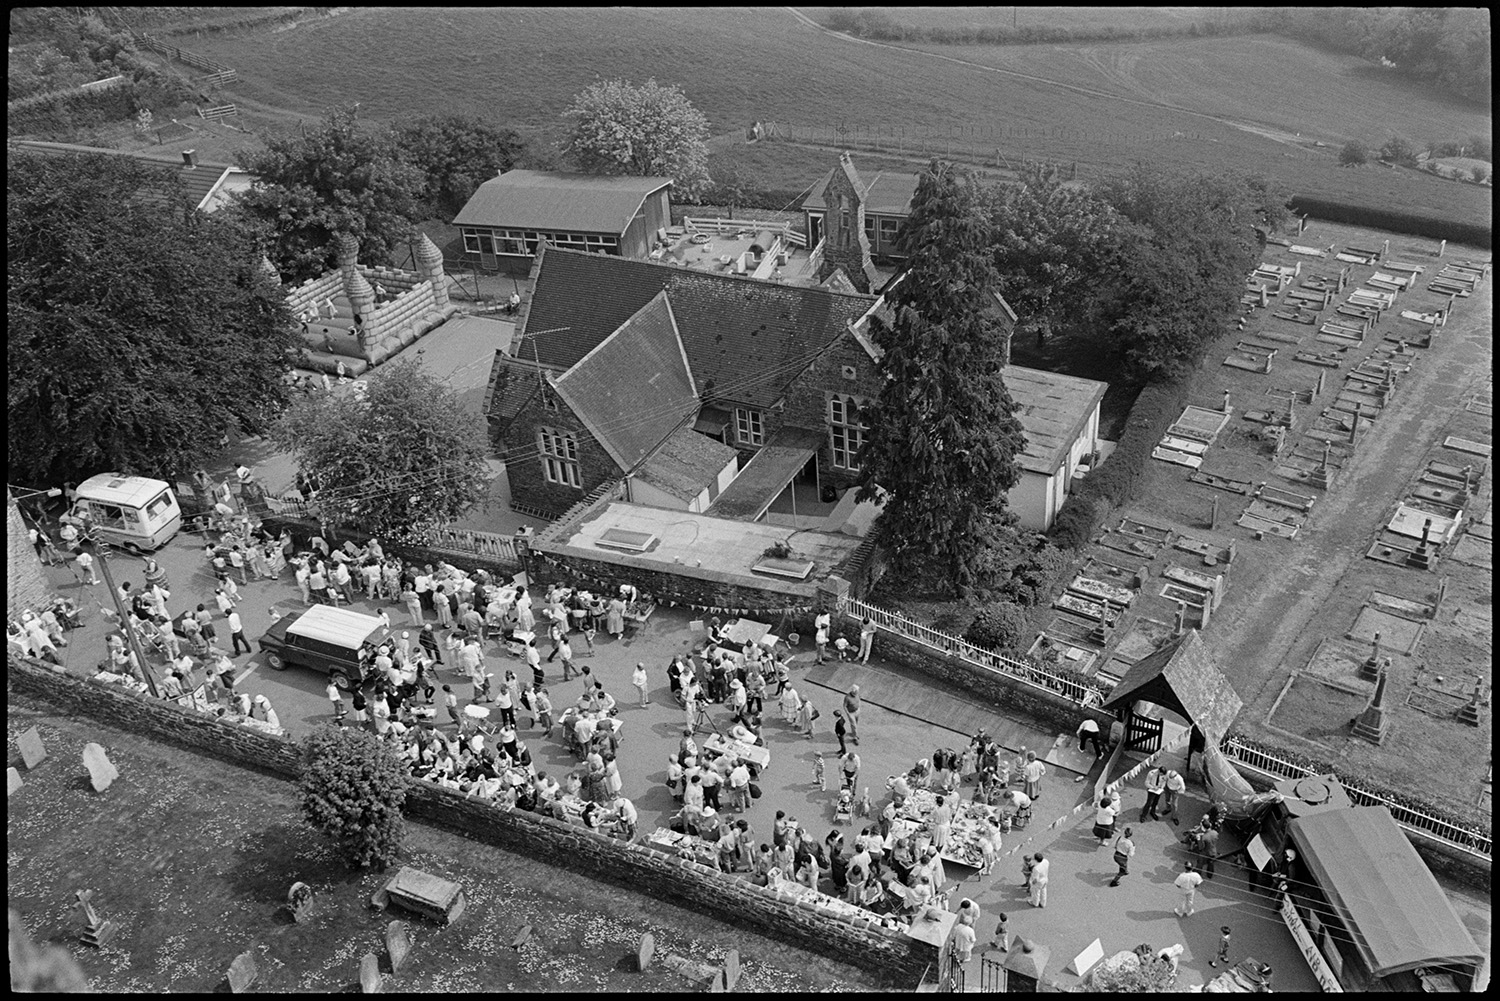 School fete viewed from Church tower. Helicopter flypast. Crowd. Former teacher chatting.
[A view from the church tower of Chulmleigh Primary School Fete and the graveyard. People visiting the fete in the playground are visible along with the school buildings.]